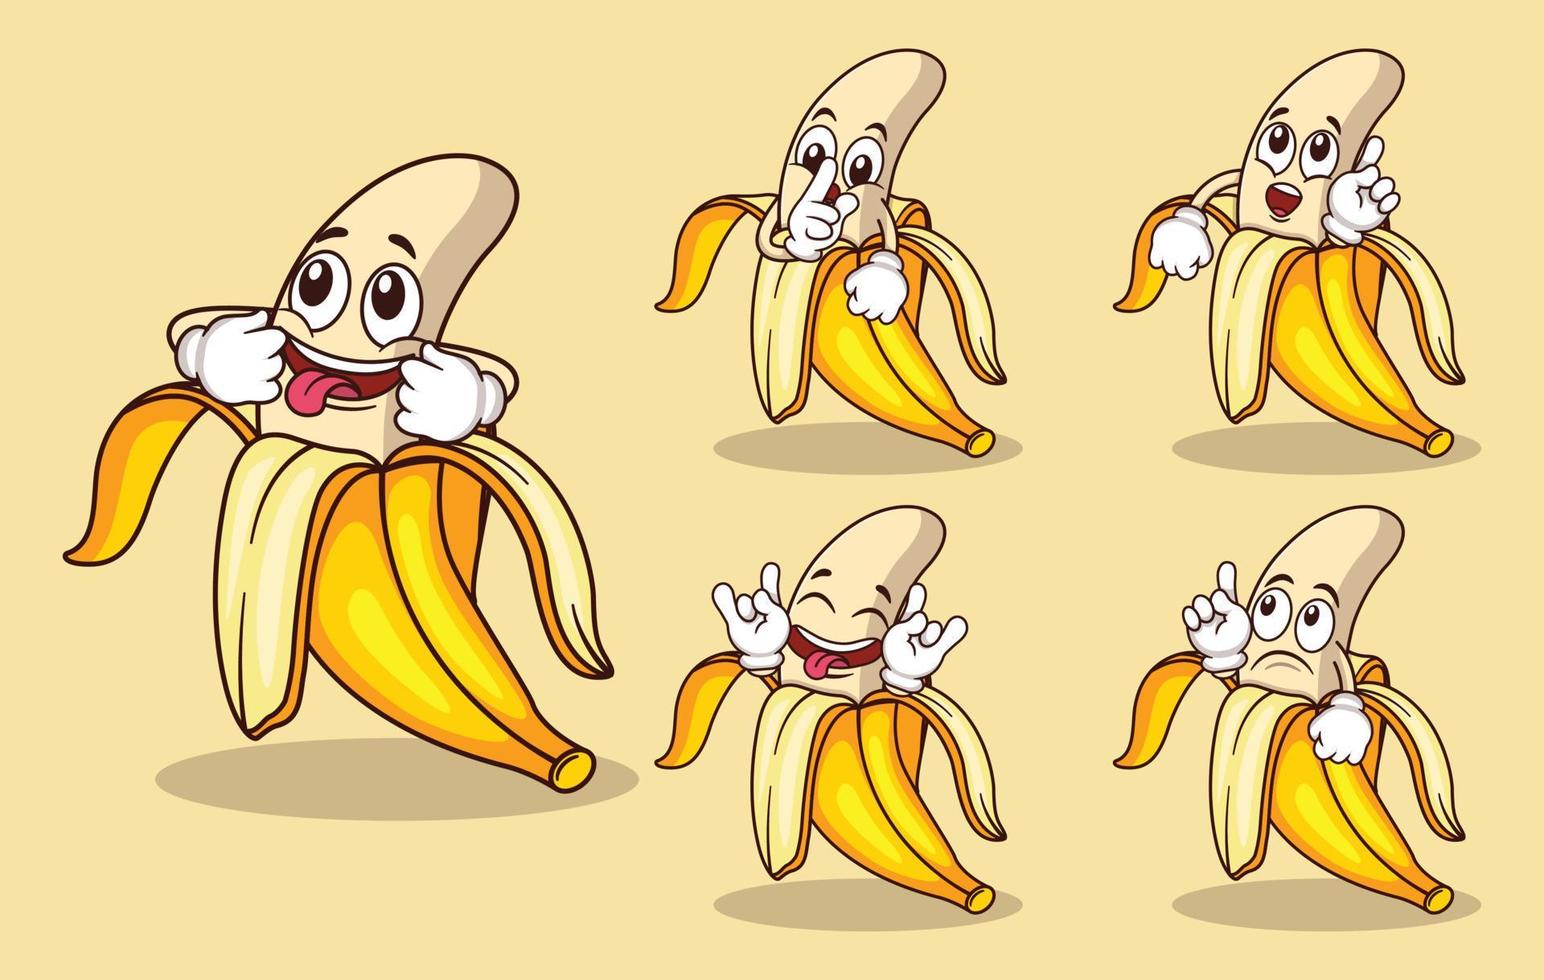 Cute banana fruit mascot with various kinds of expressions set collection vector